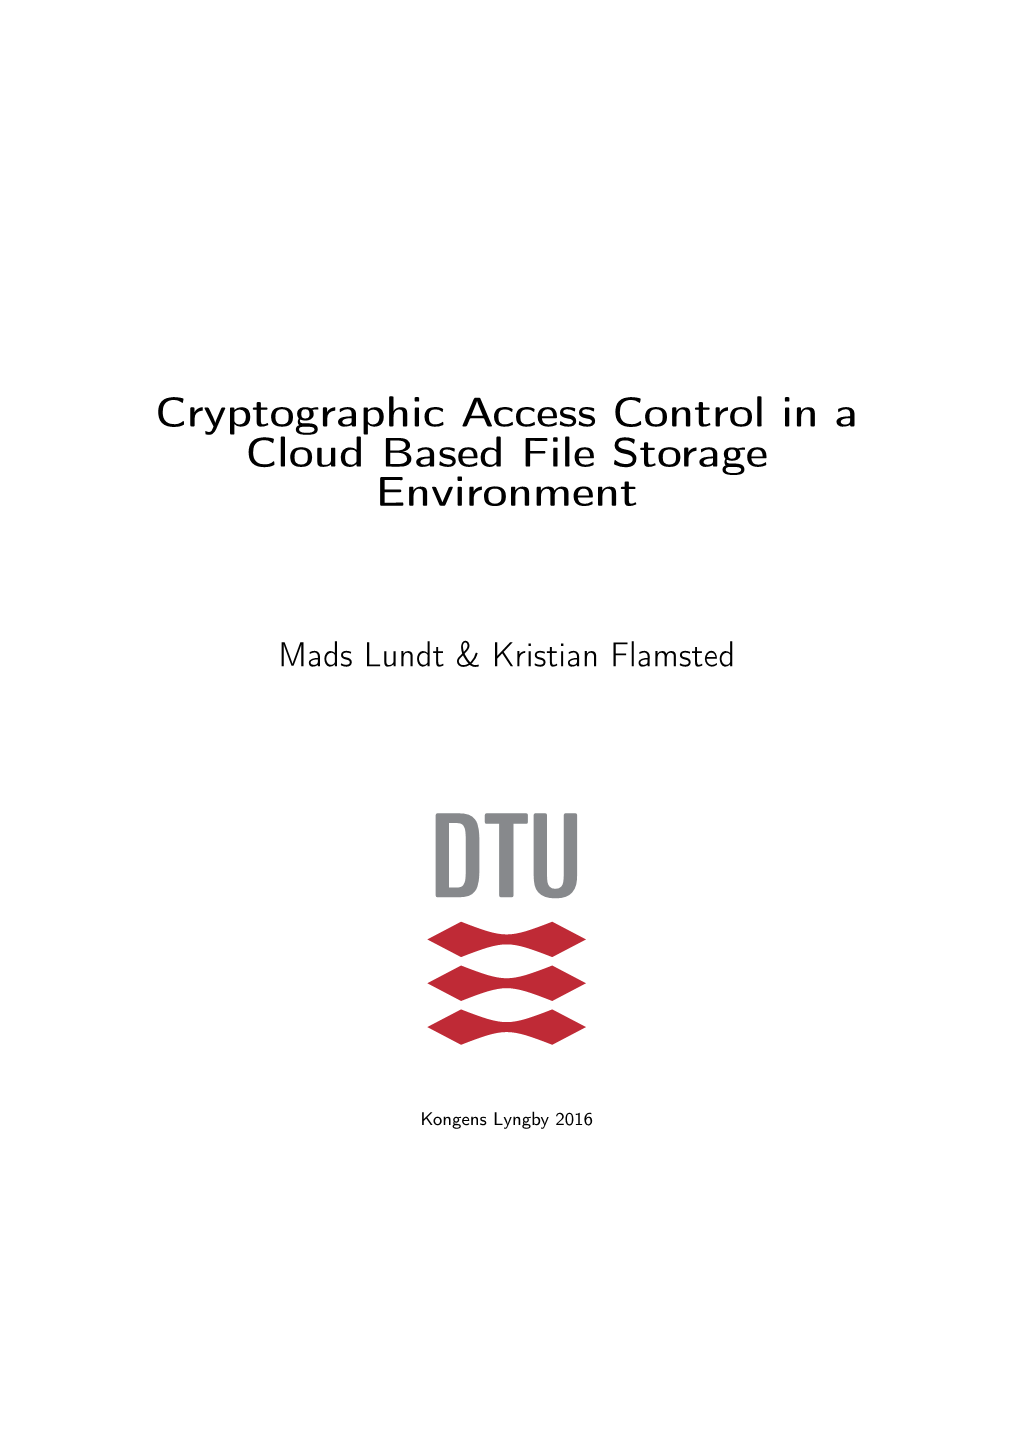 Cryptographic Access Control in a Cloud Based File Storage Environment